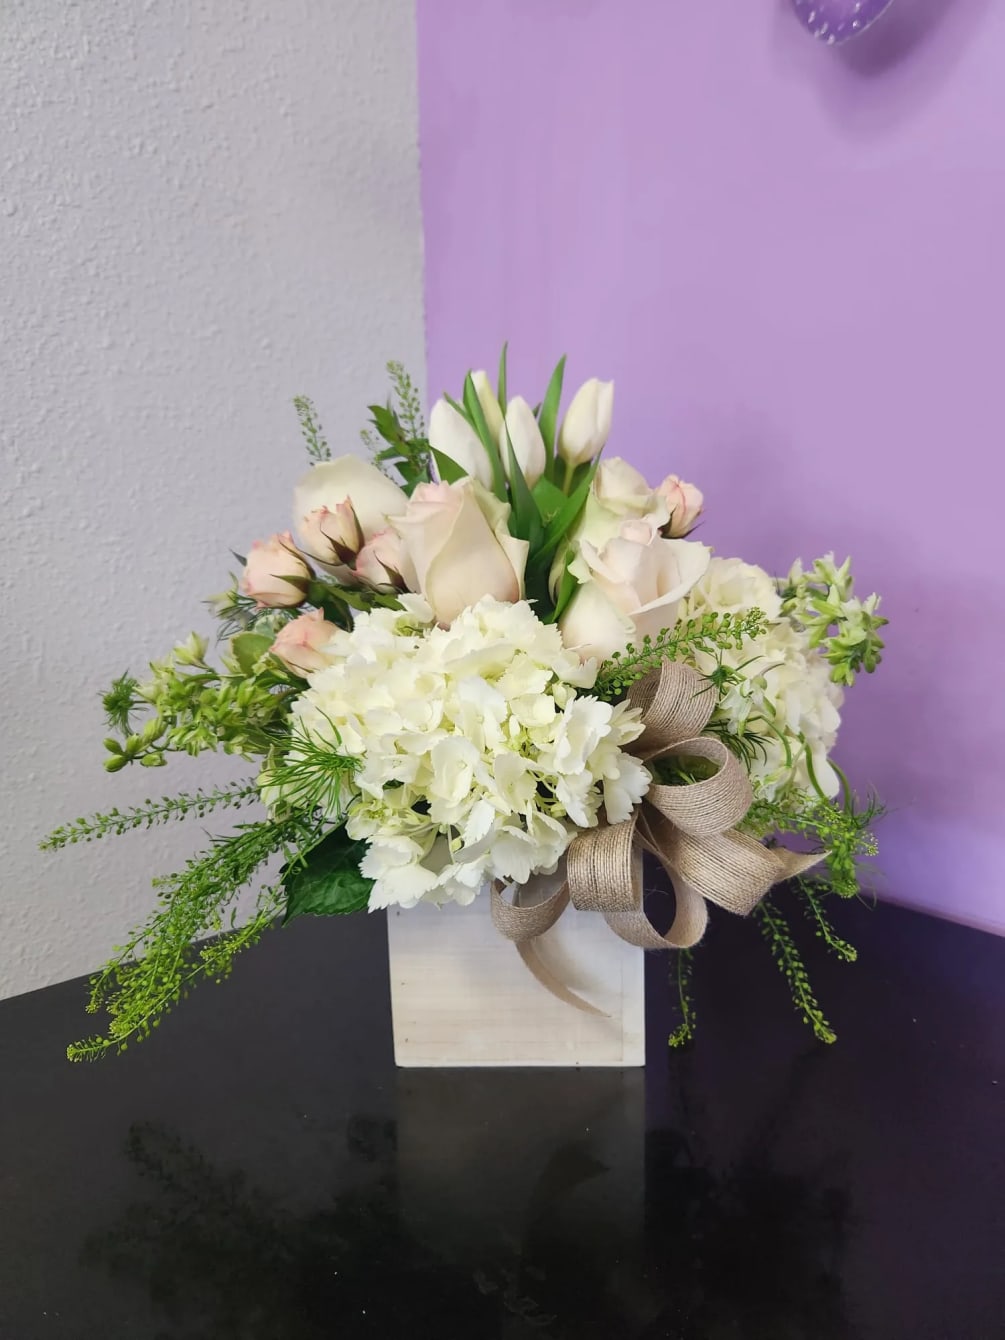 This sophisticated arrangement features an elegant mix of white and cream blooms